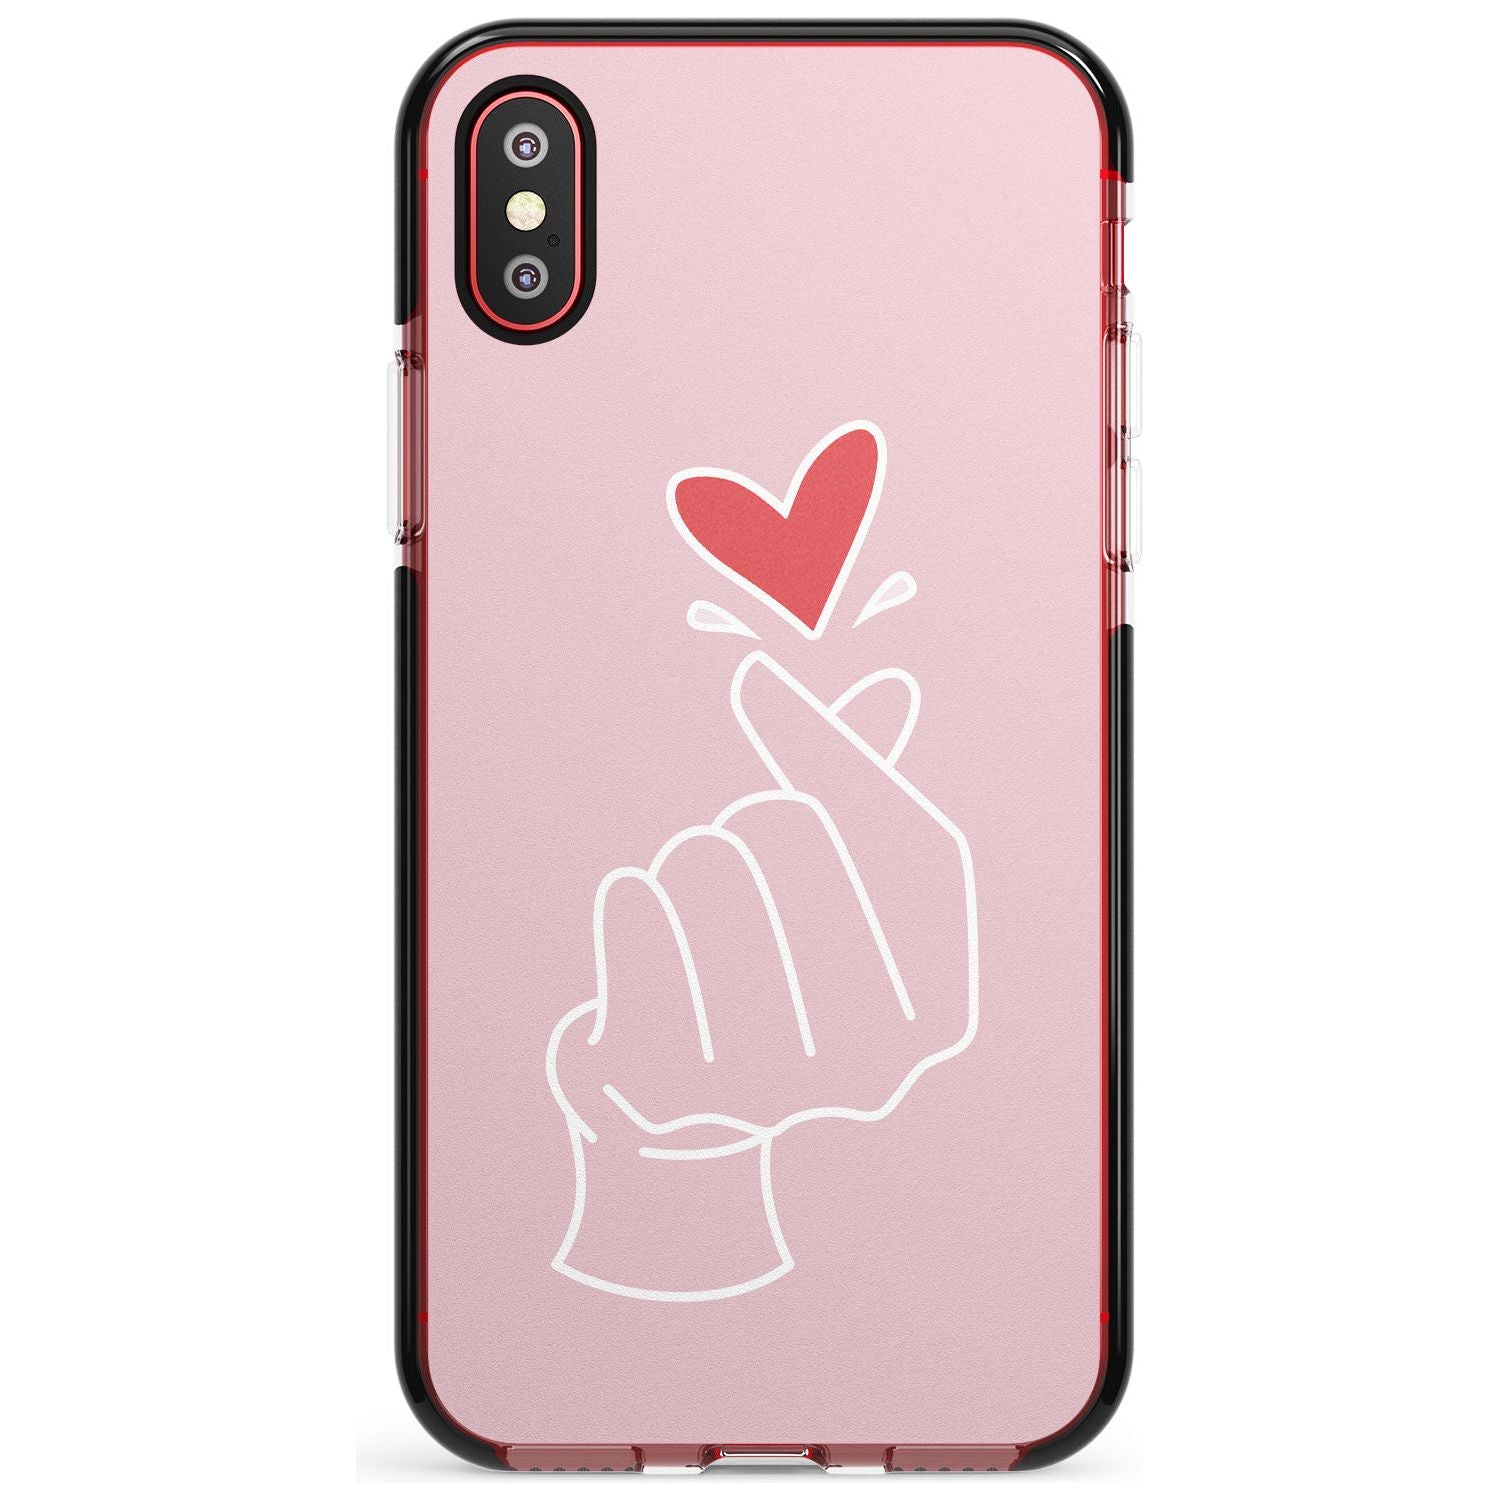 Finger Heart in Pink Pink Fade Impact Phone Case for iPhone X XS Max XR